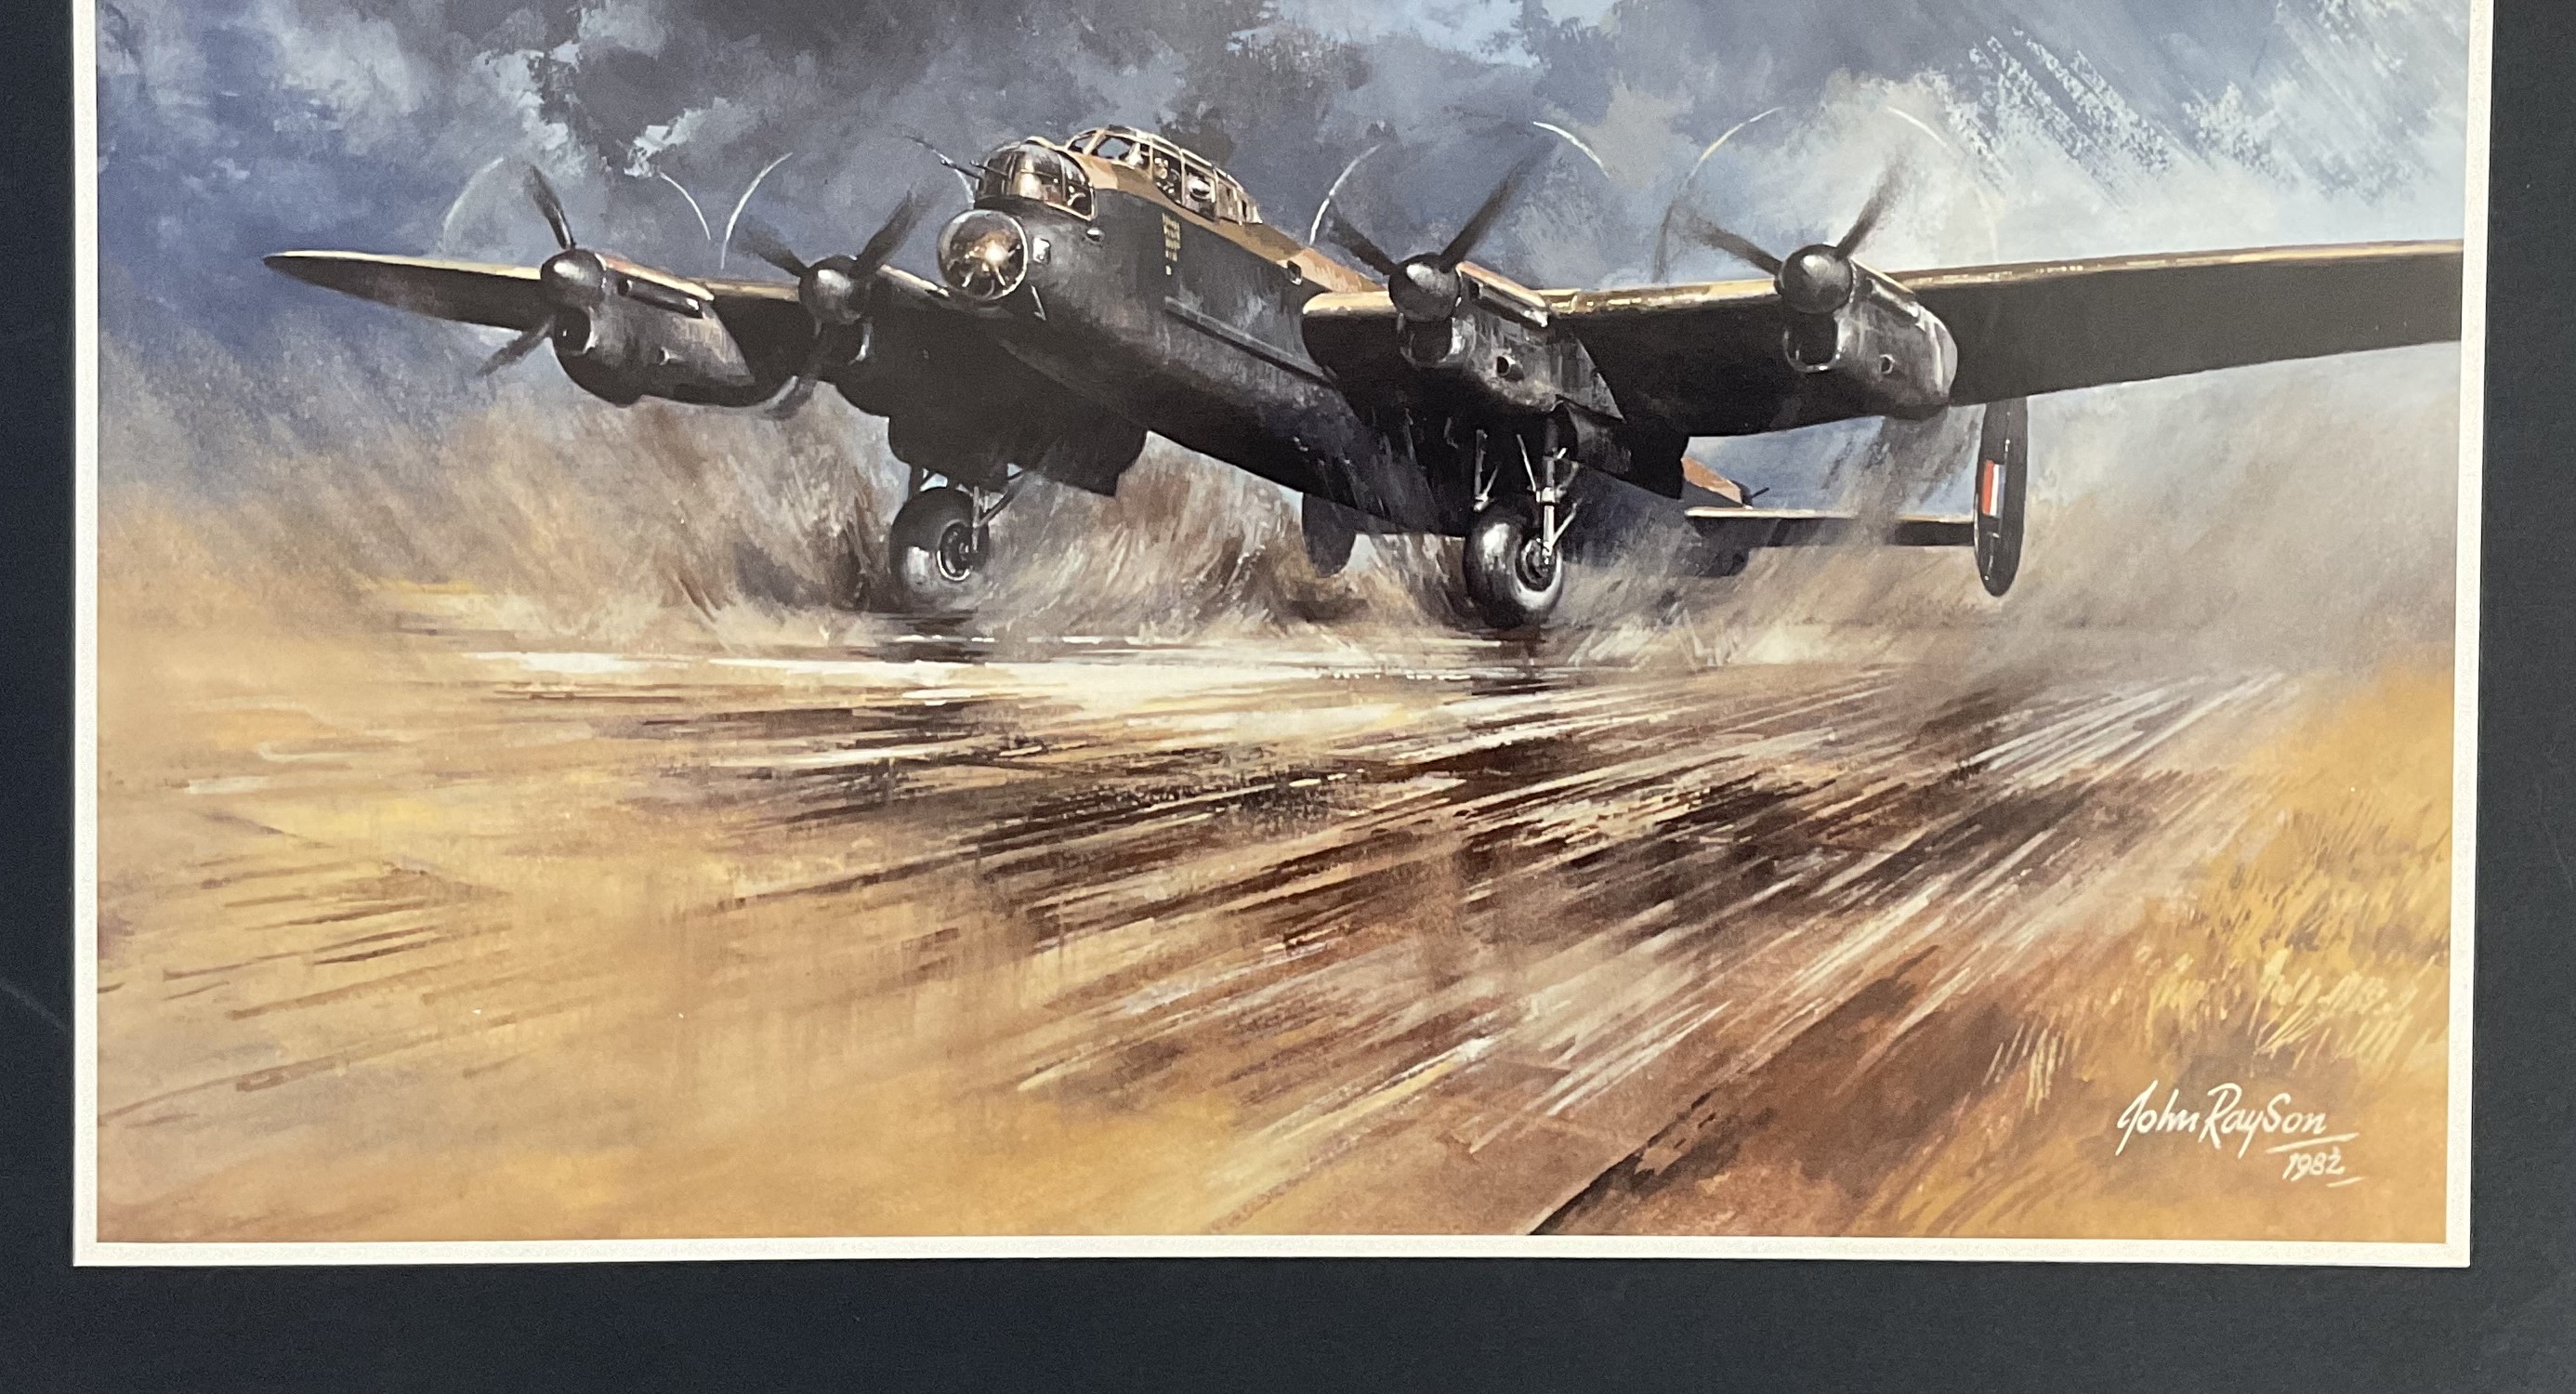 WW2 Colour Print Lancaster Bomber Taking Off By John Rayson 1982. Measures 17x13 inches appx. Very - Image 6 of 6